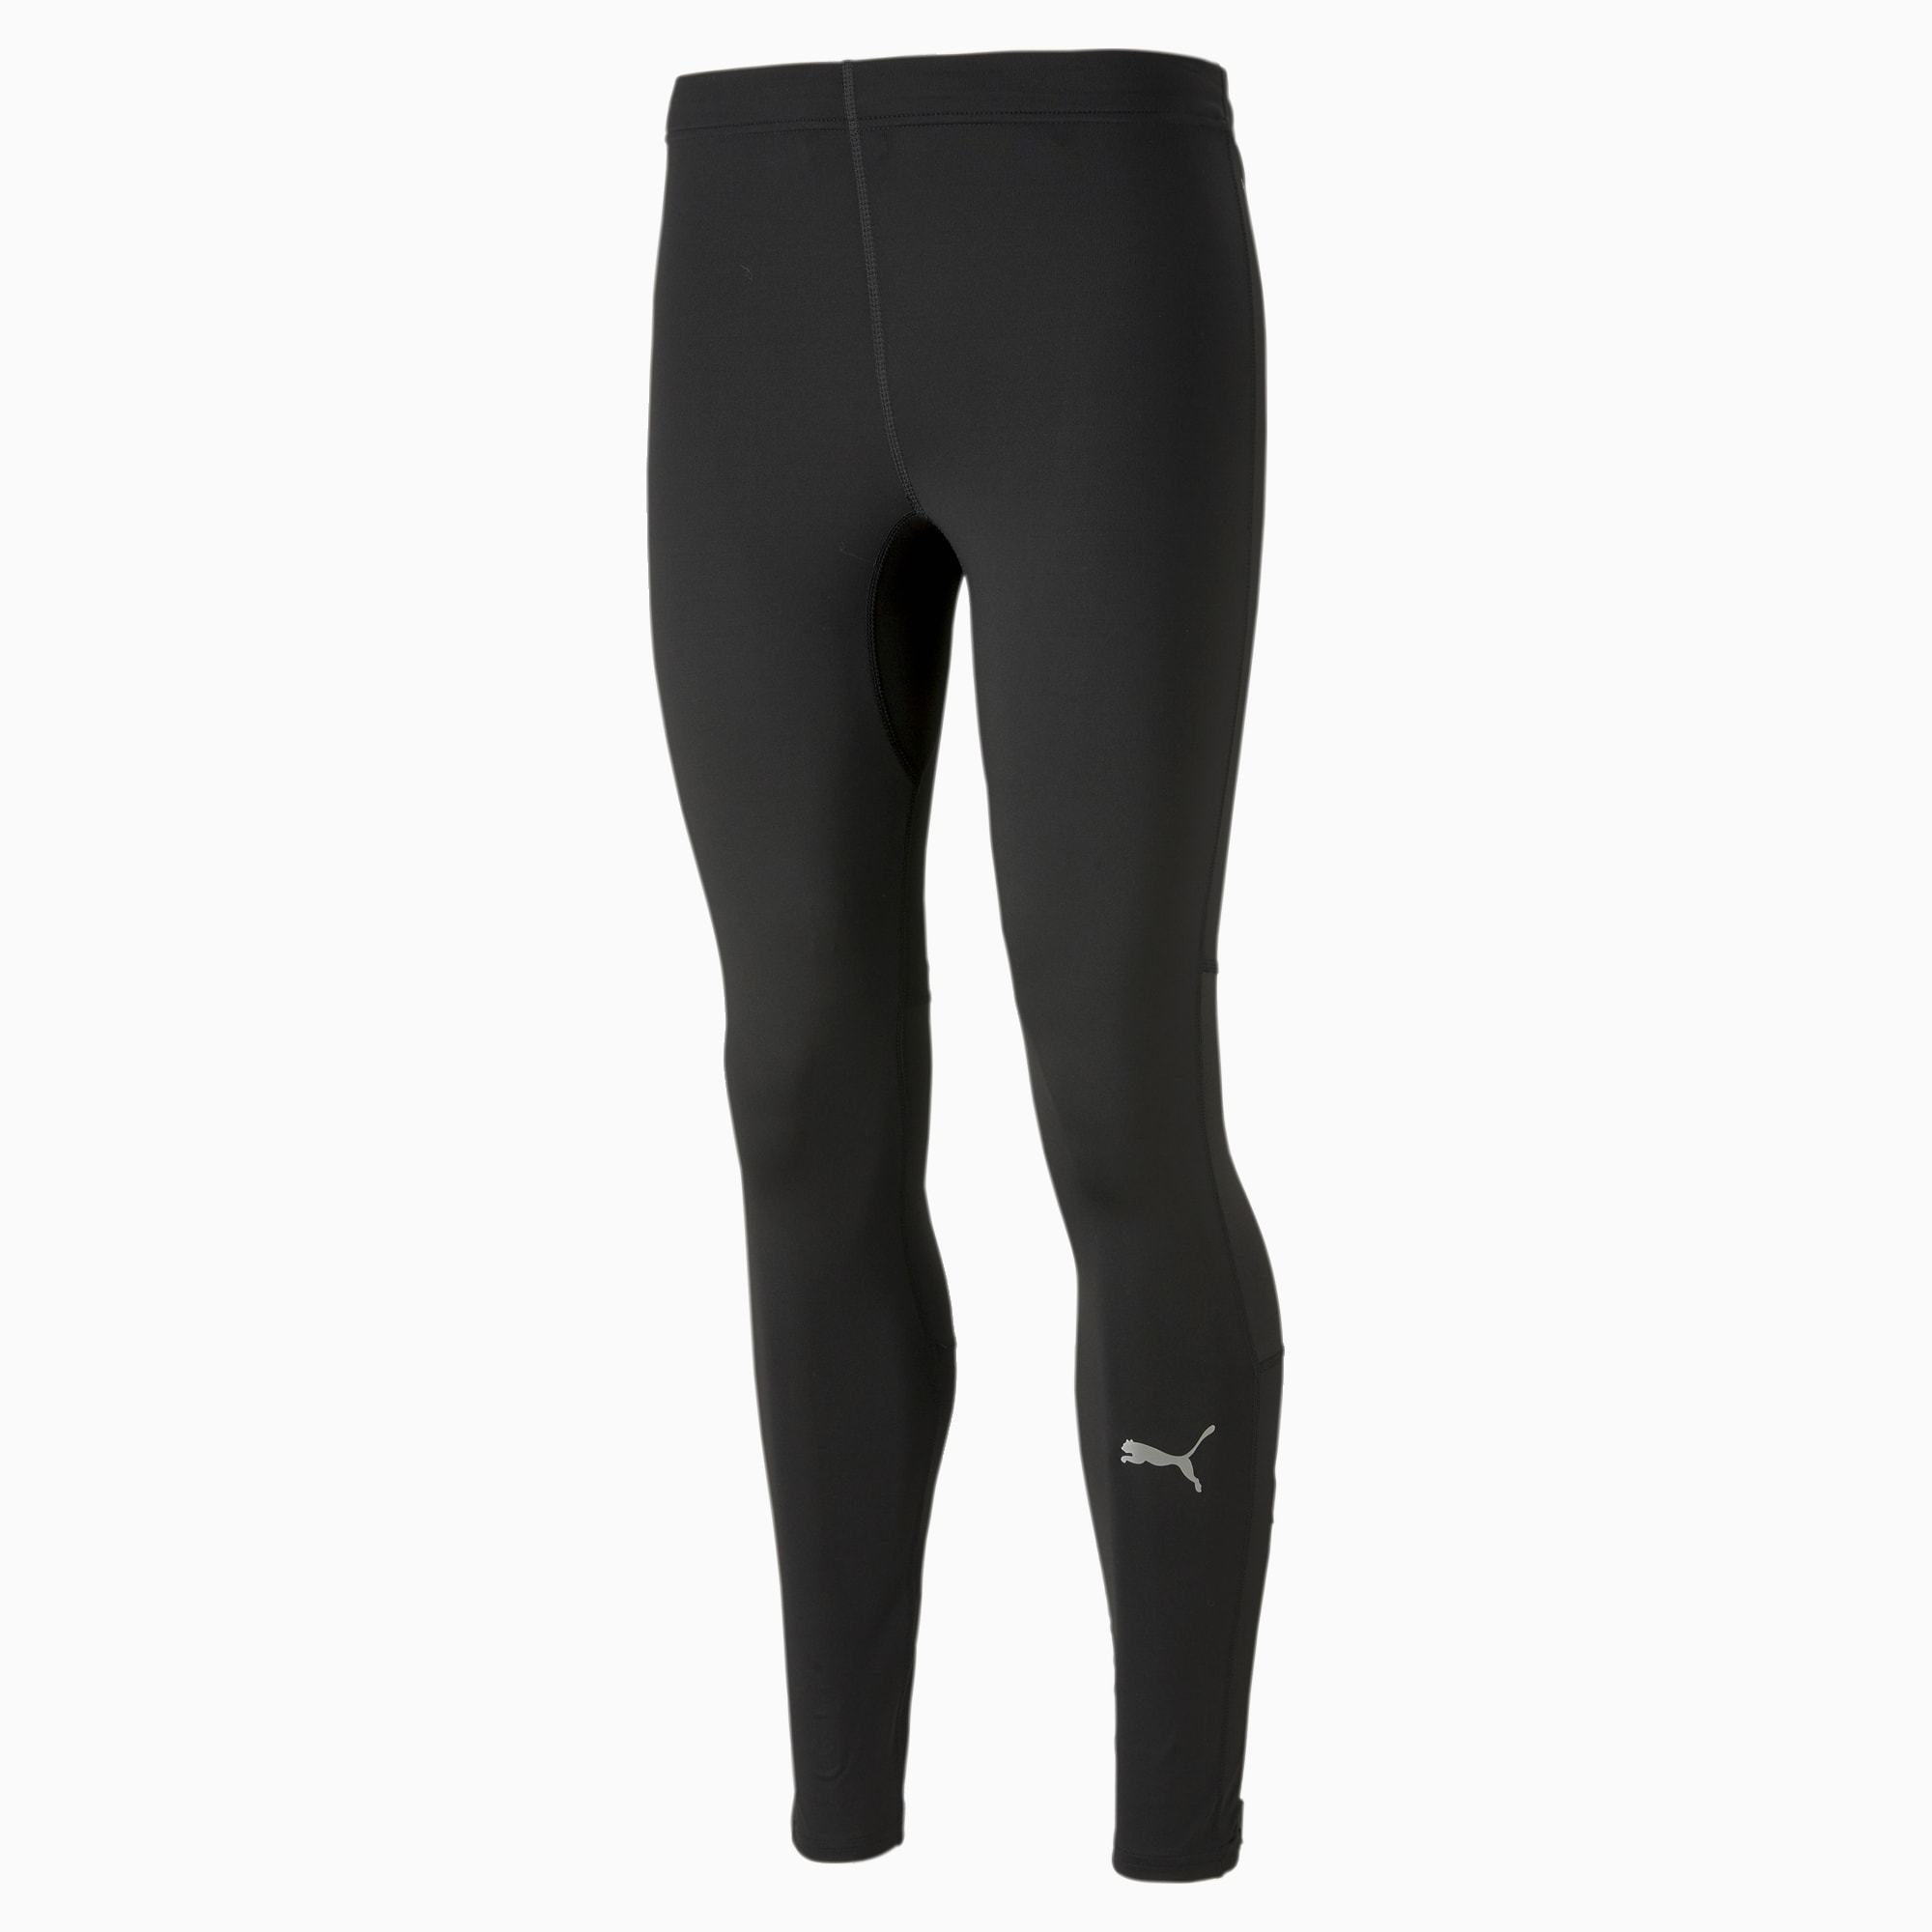 Buy Puma Sports Tights, Clothing Online